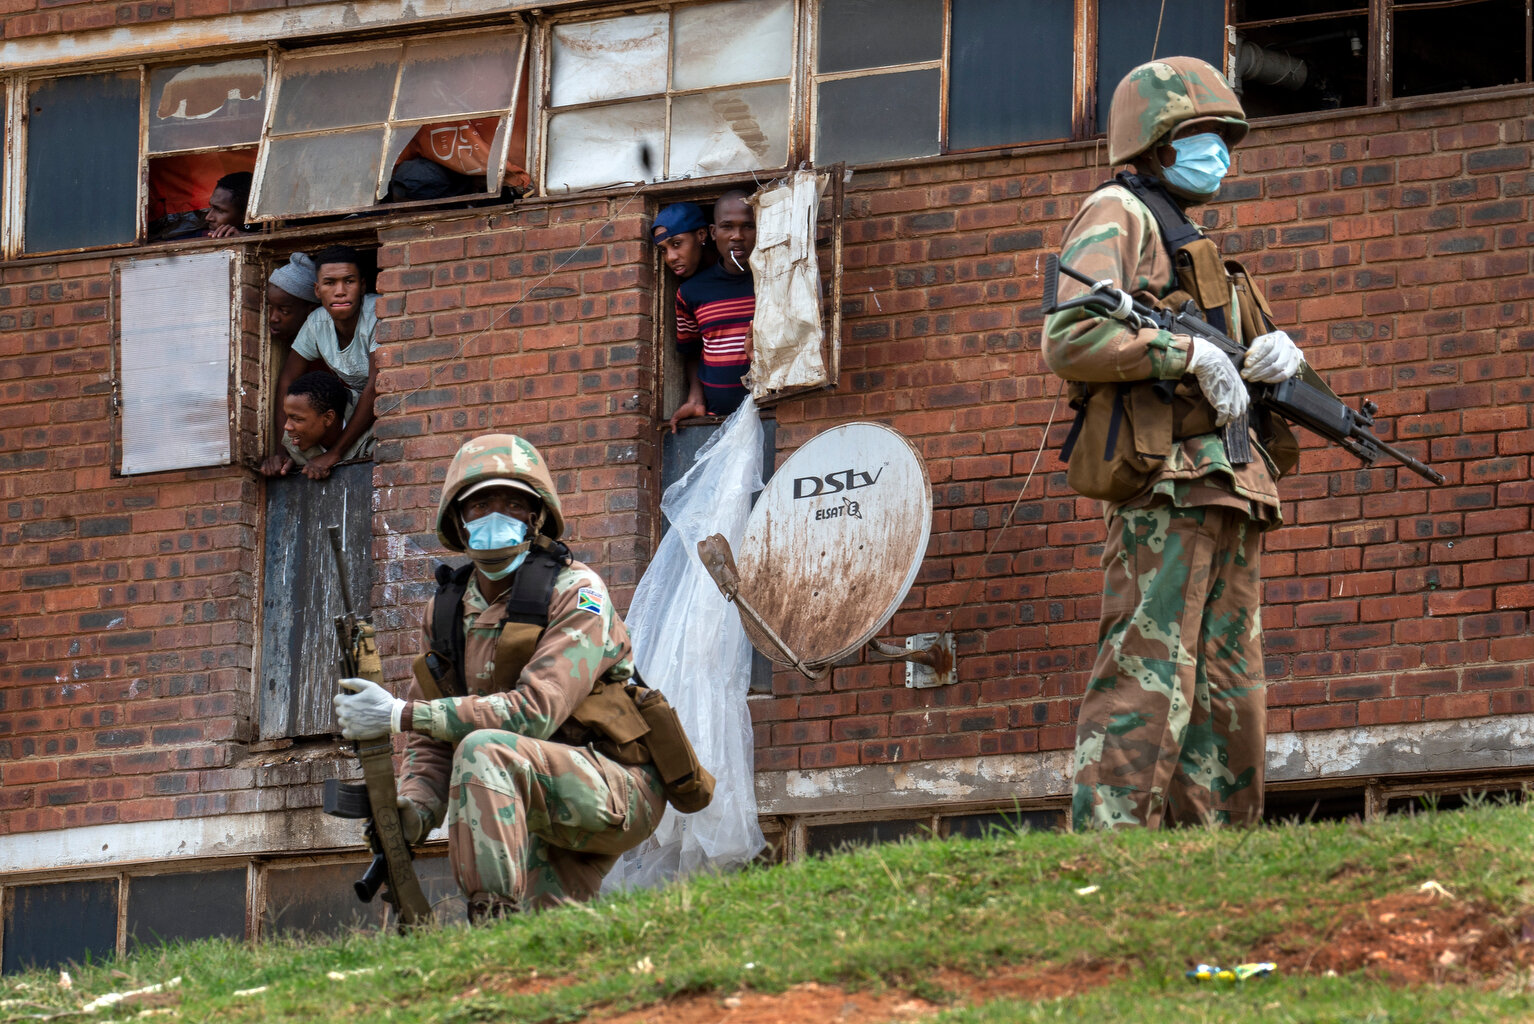  South African National Defense Forces patrol the Men's Hostel in the densely populated Alexandra township east of Johannesburg, March 28, 2020, enforcing a strict lockdown in an effort to control the spread of the coronavirus. It was just a question